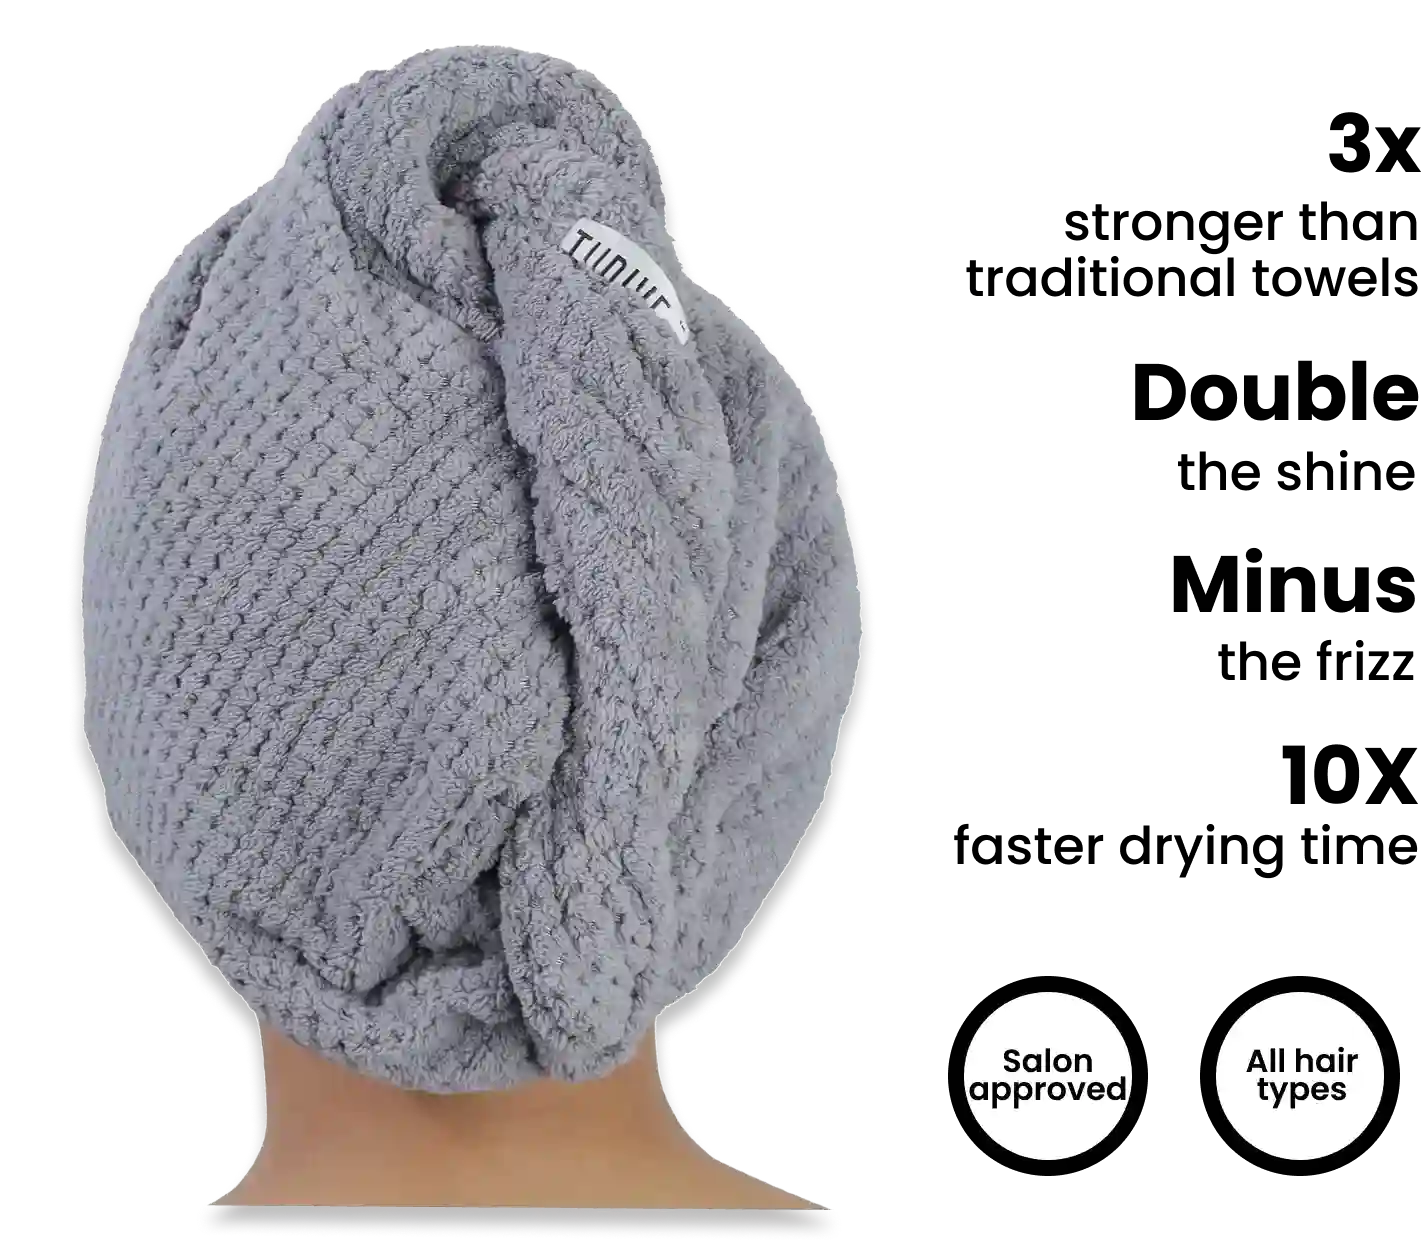 A hair towel wrap for easy hair drying